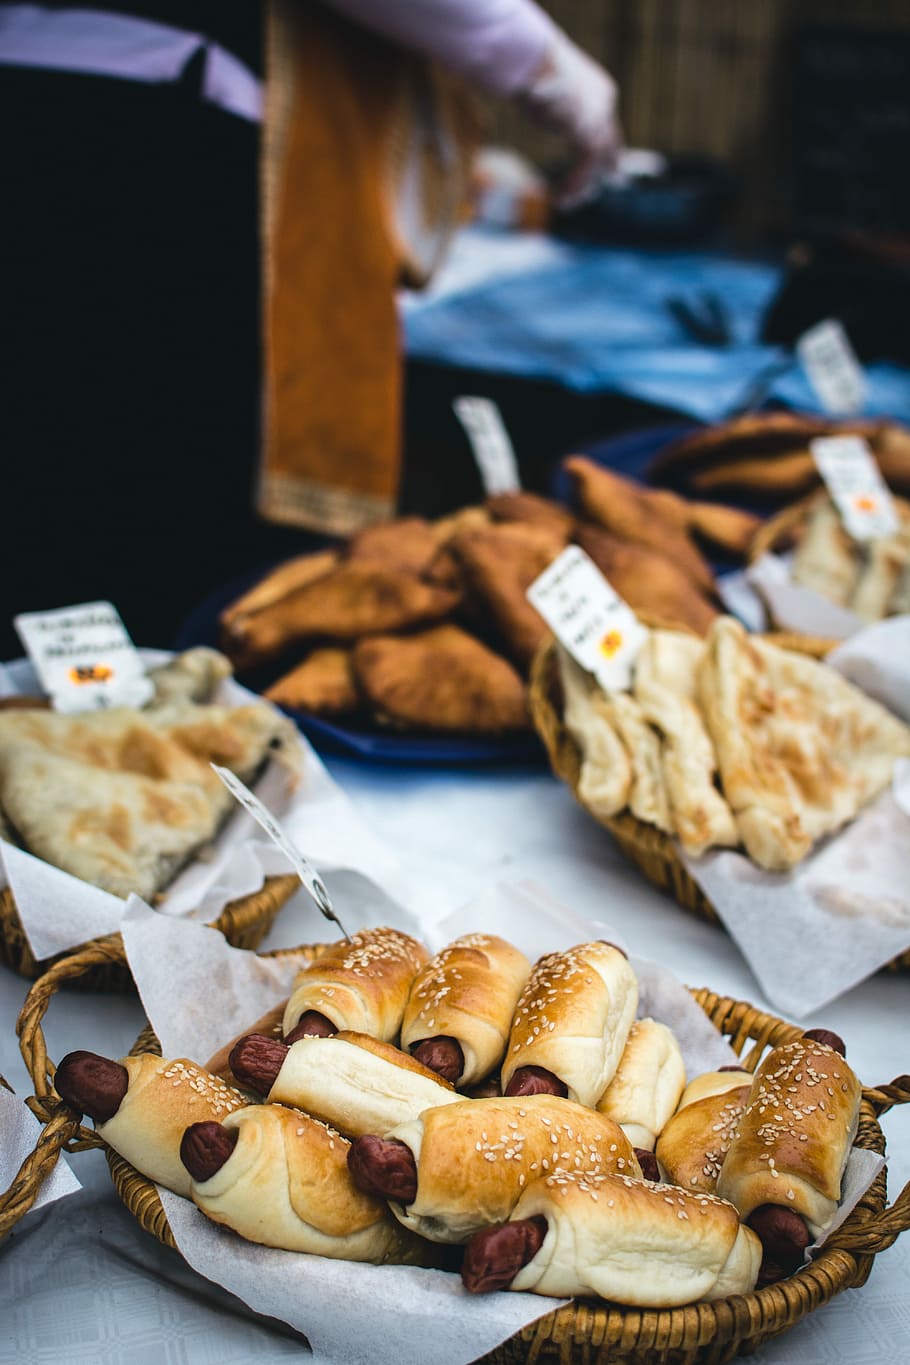 Sausage rolls, outside, pastry, sausage, snack, street food, food, gourmet, freshness, bread